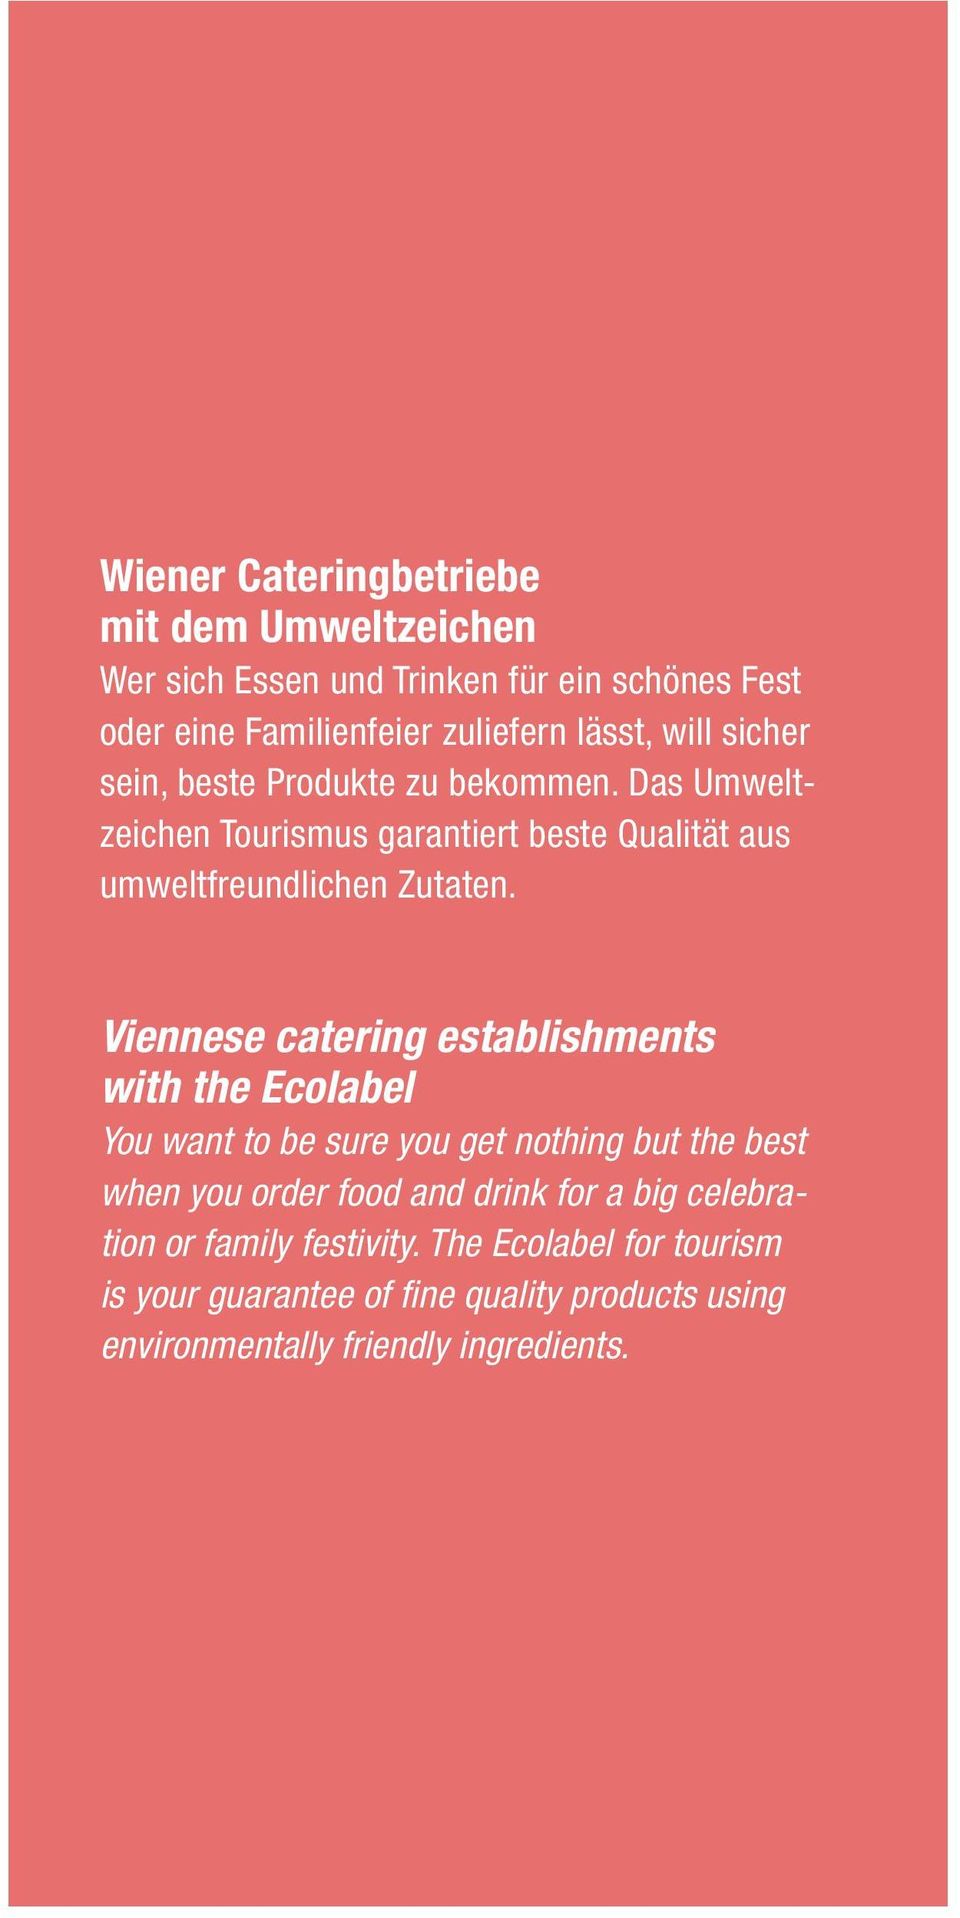 Viennese catering establishments with the Ecolabel You want to be sure you get nothing but the best when you order food and drink for a